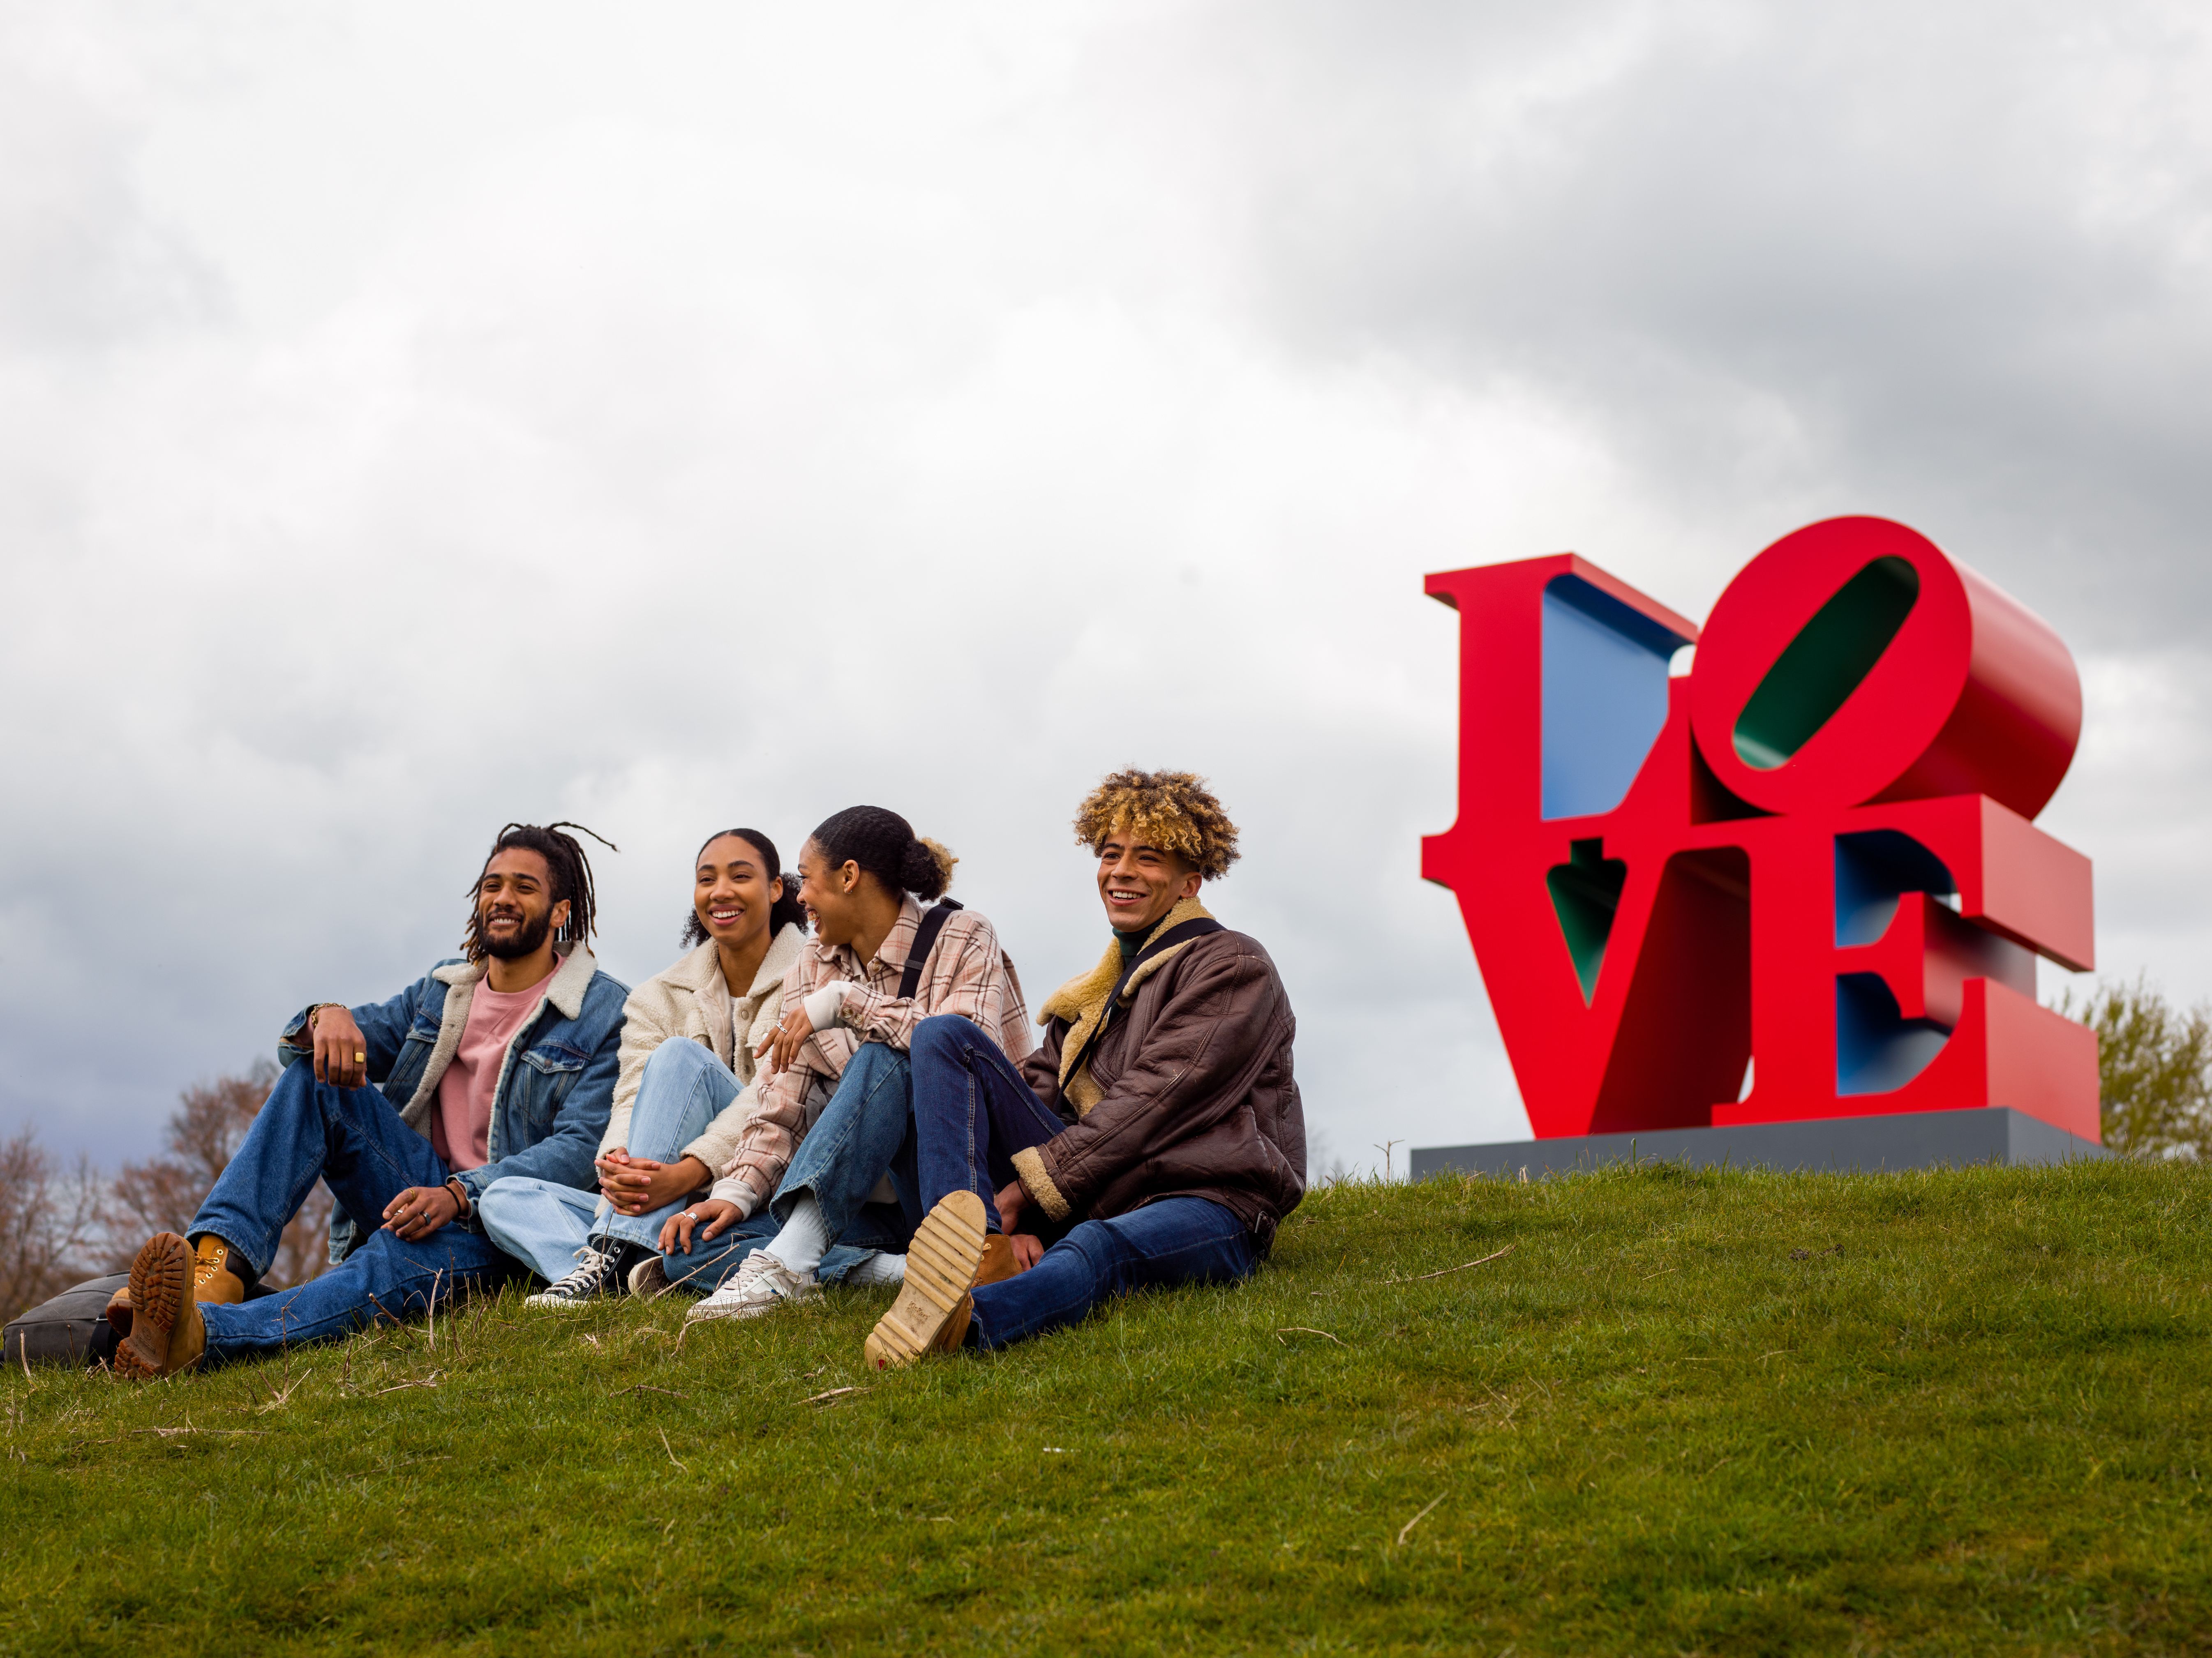 Four friends chatting in front of a red sculpture that reads LOVE